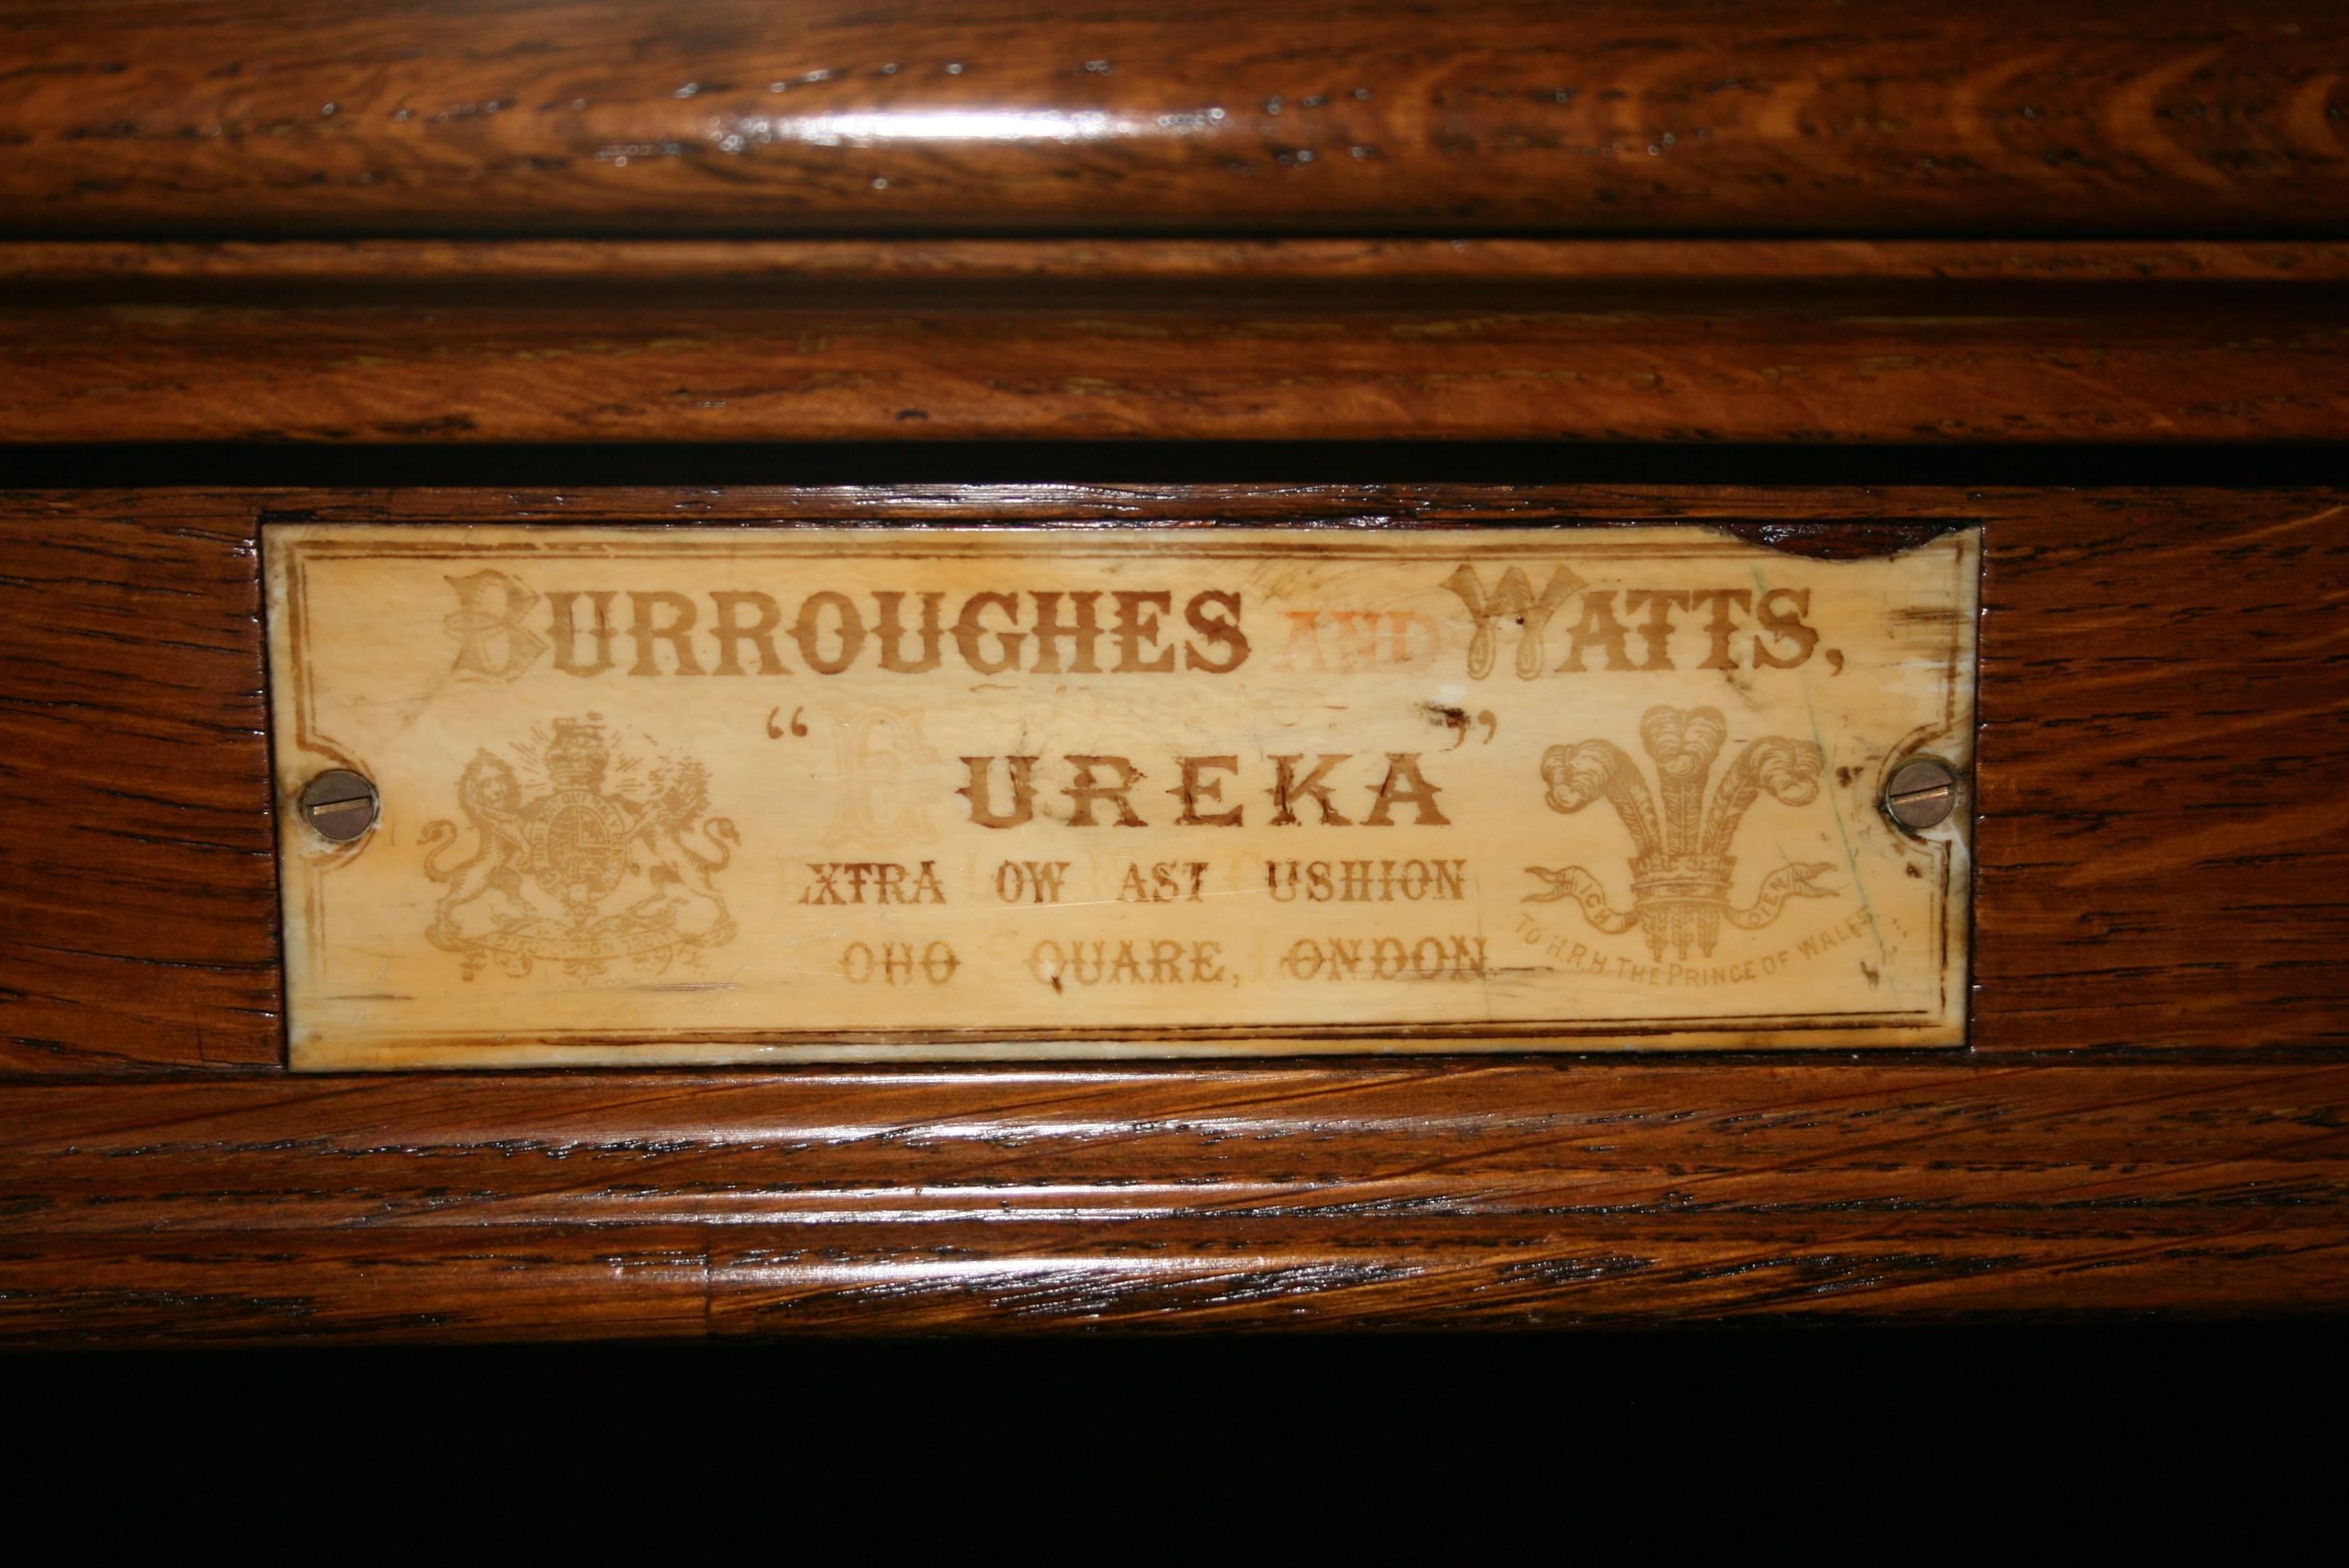 burroughes and watts snooker table